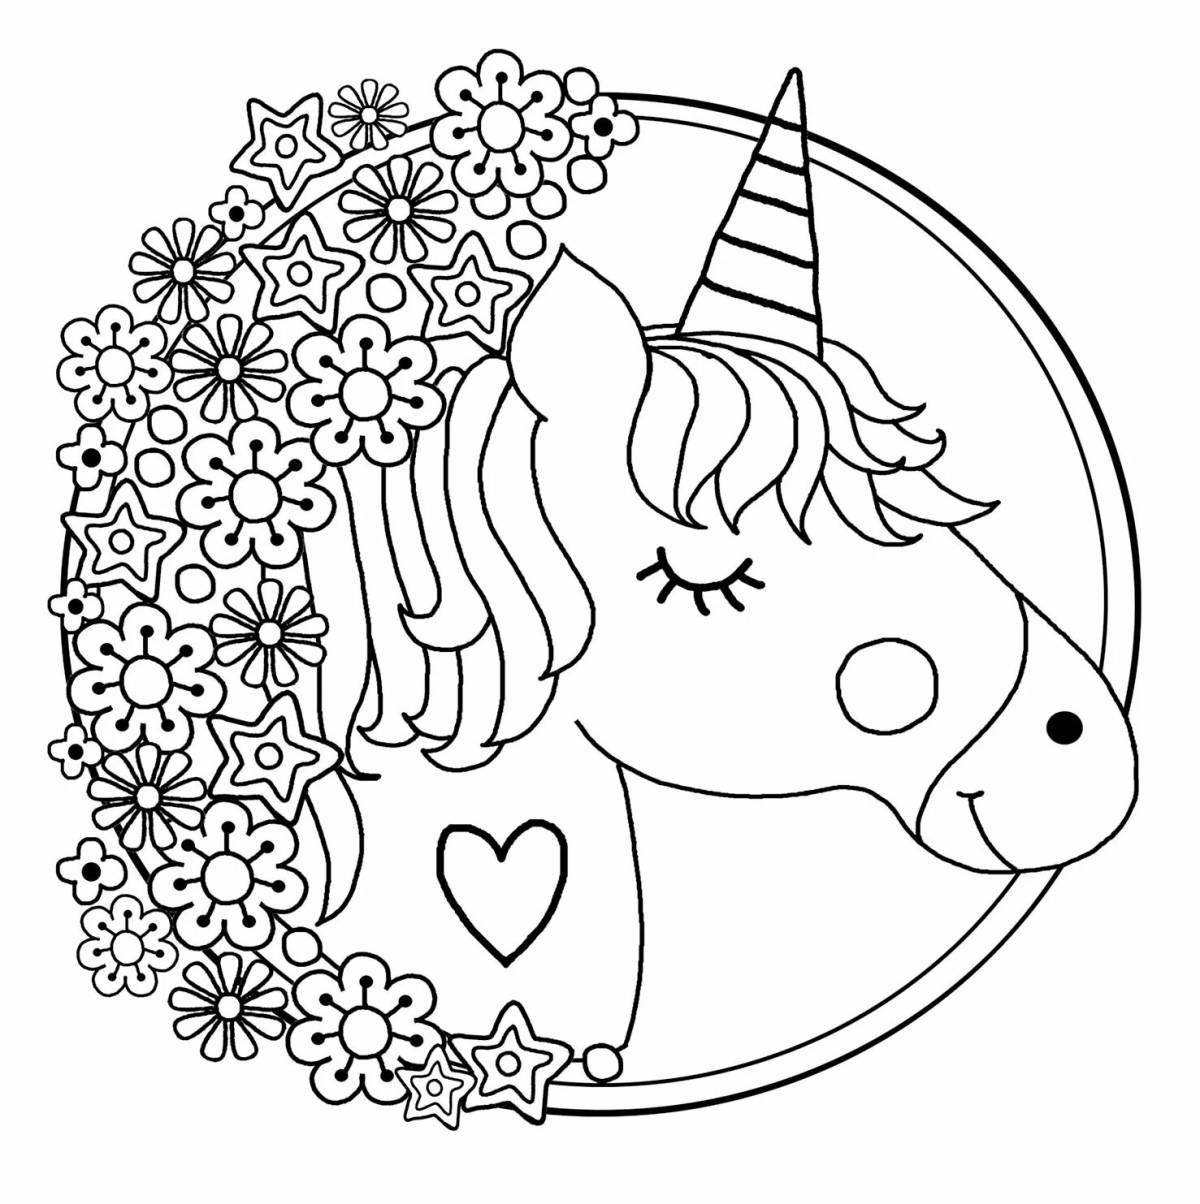 Unicorn coloring page for girls #15